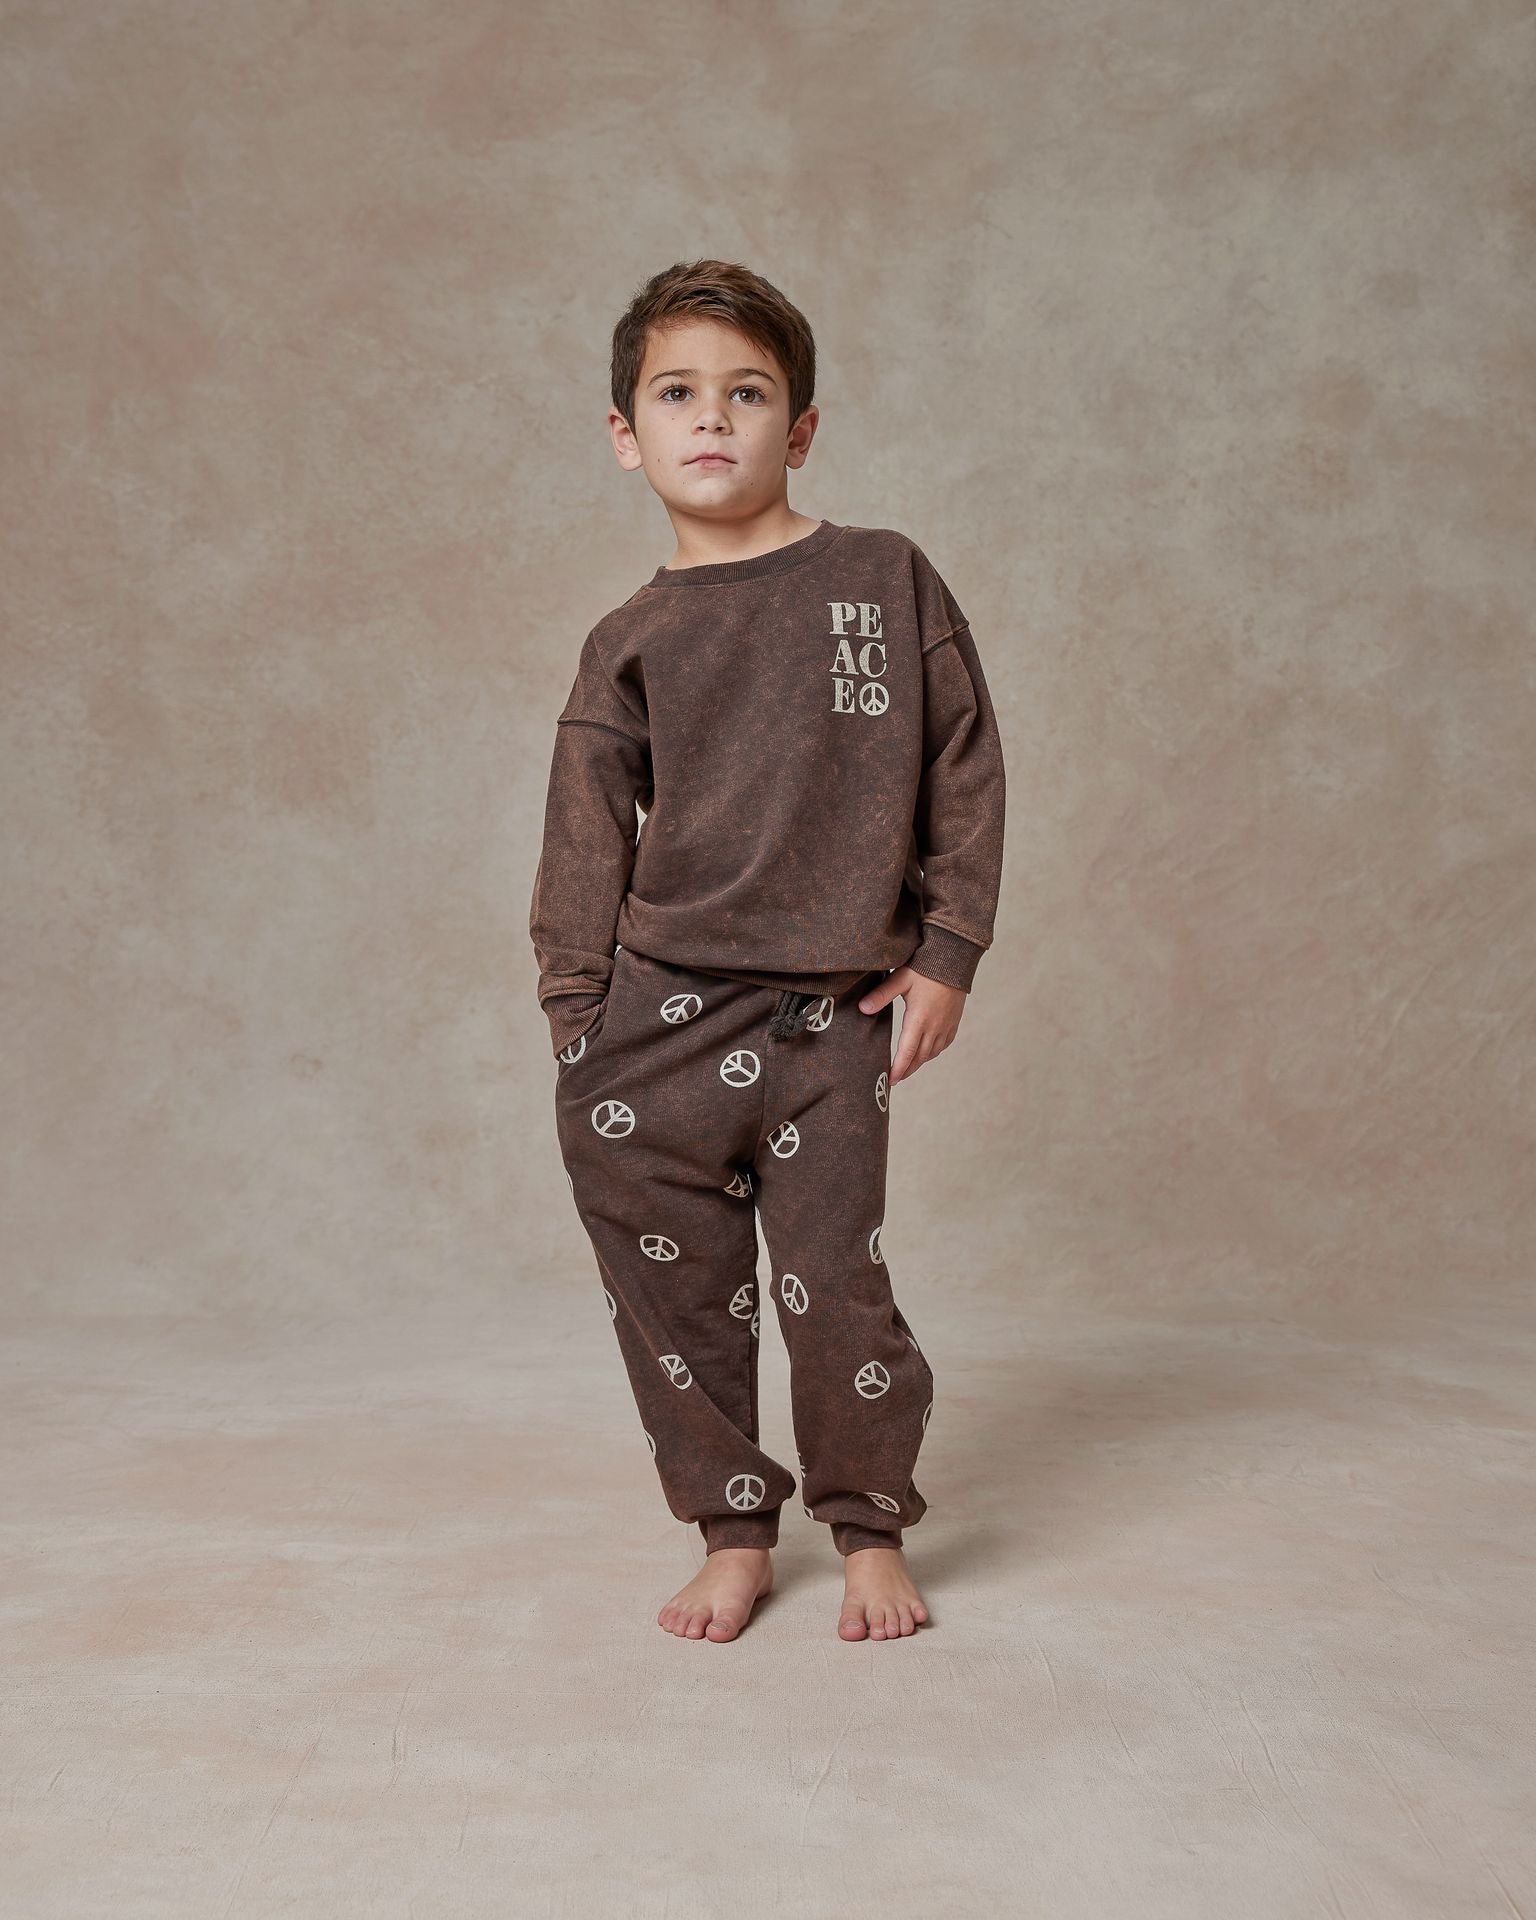 jogger sweatpant || peace II - Rylee + Cru | Kids Clothes | Trendy Baby Clothes | Modern Infant Outfits |